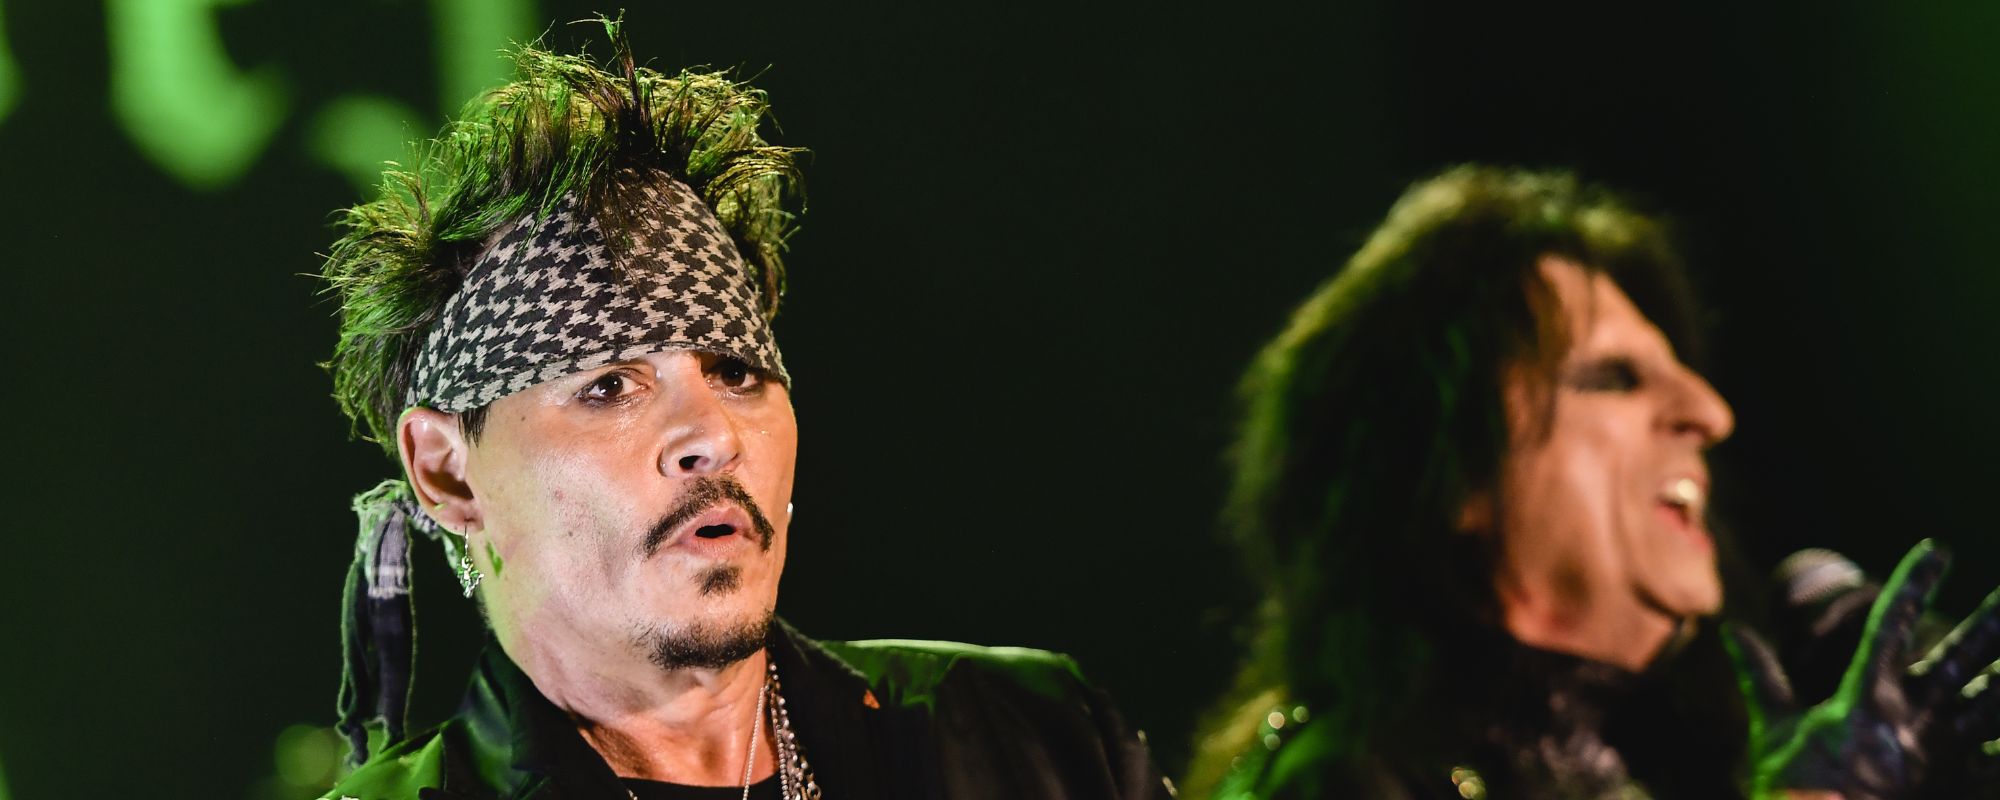 “This Kid’s a Star, but the Songs Suck”: Guns N’ Roses A&R Exec Recalls Johnny Depp Being the Worst Guitarist He’d Ever Seen